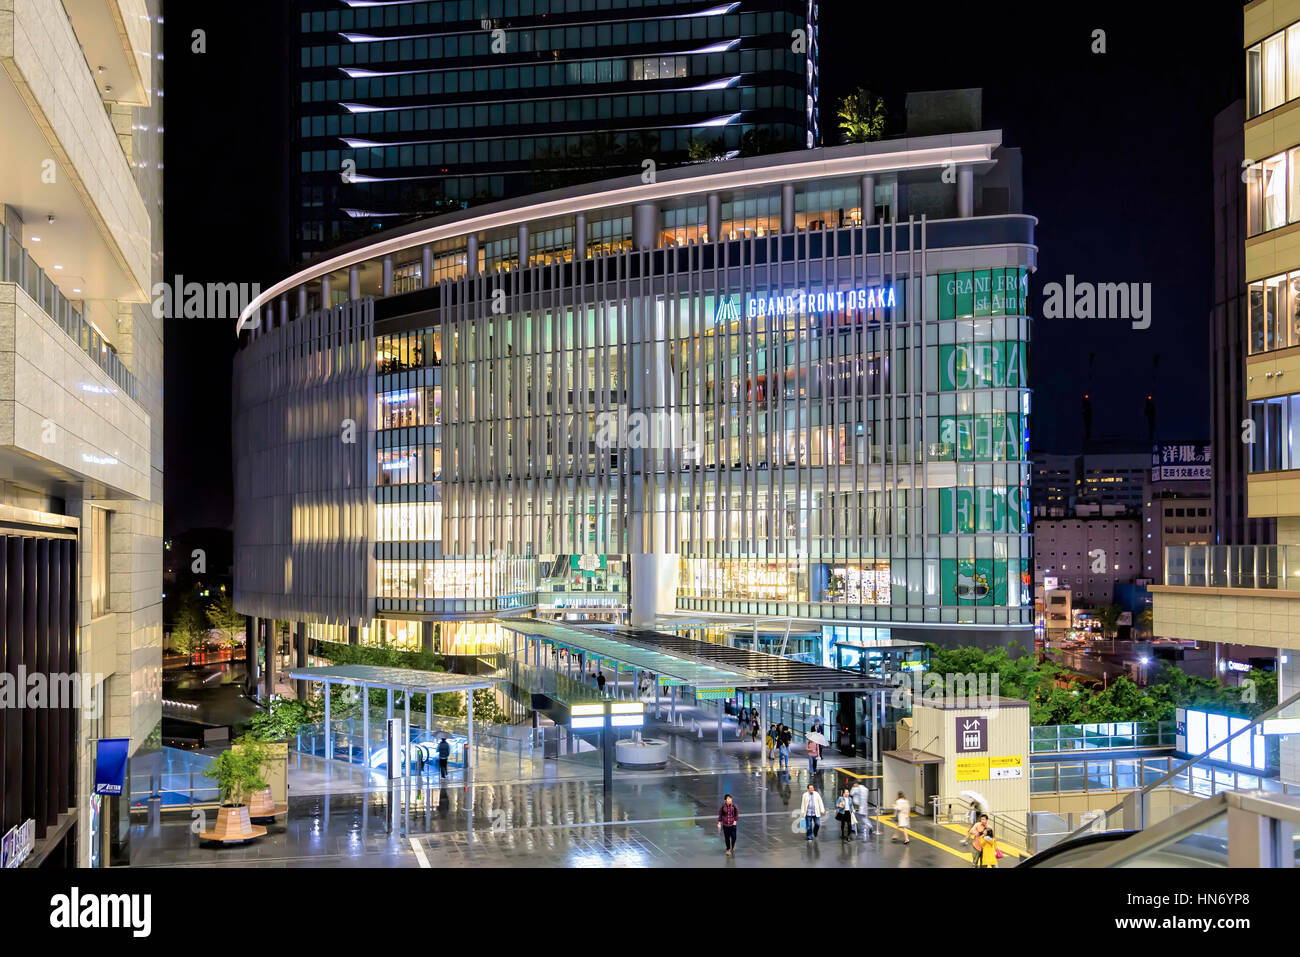 Osaka, Japan - April 29, 2014: View of Grand Front Osaka commercial complex. Grand Front is a large commercial complex north of JR Osaka Station Stock Photo